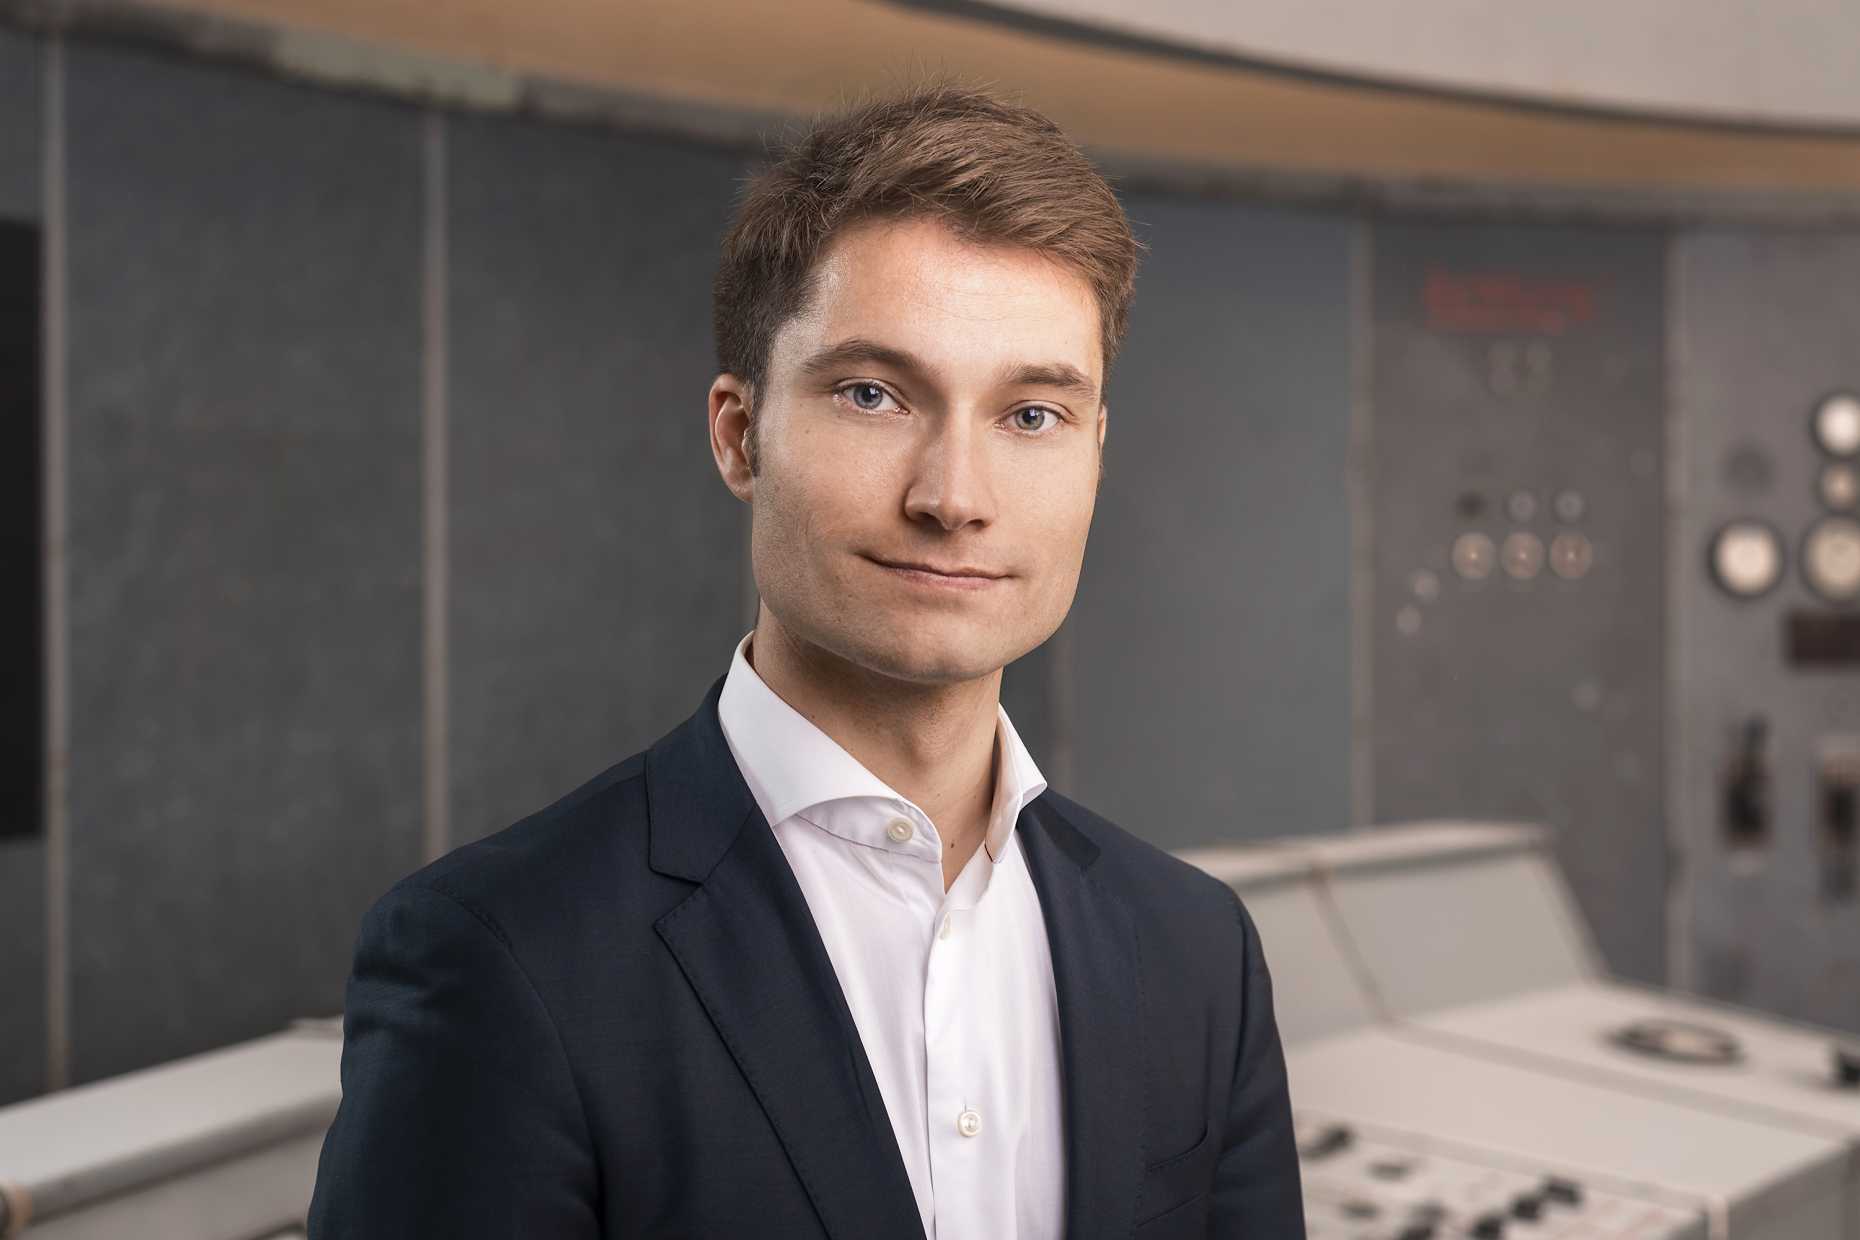 The former ETH doctoral student Johannes Reck is CEO and co-founder of GetYourGuide (Photograph: GetyourGuide/ fotoforge.eu)